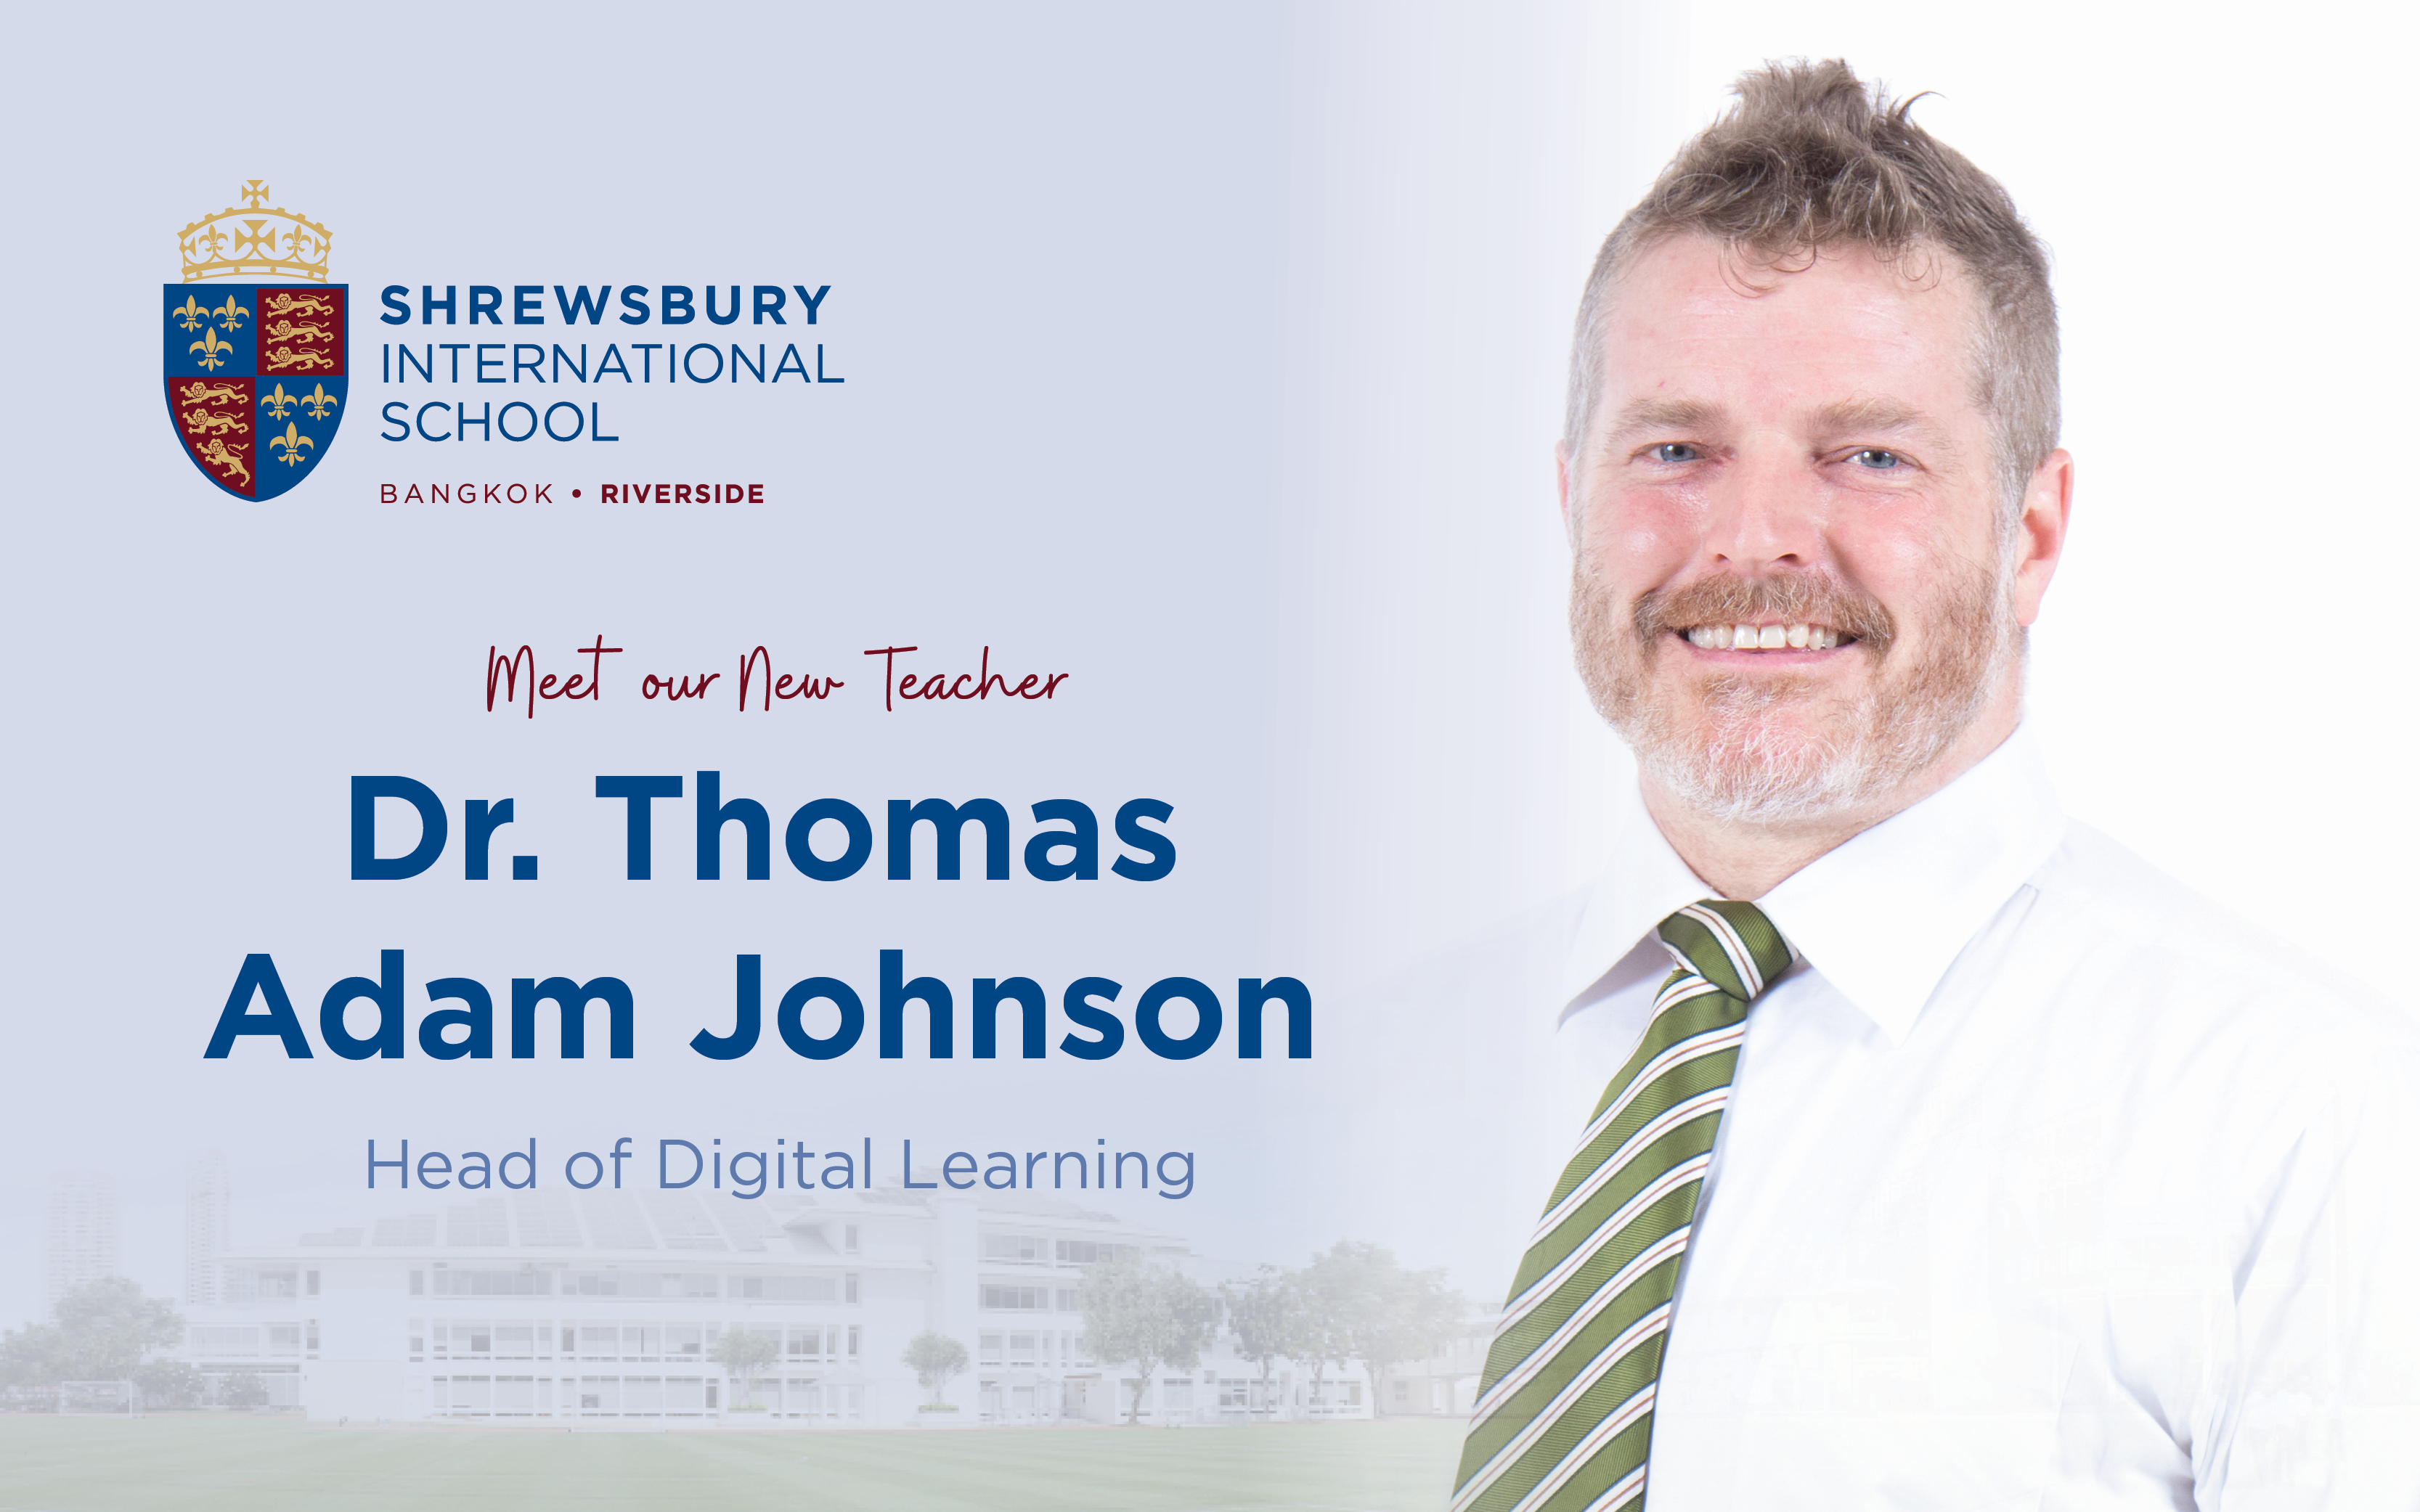 Meet our New Head of Digital Learning